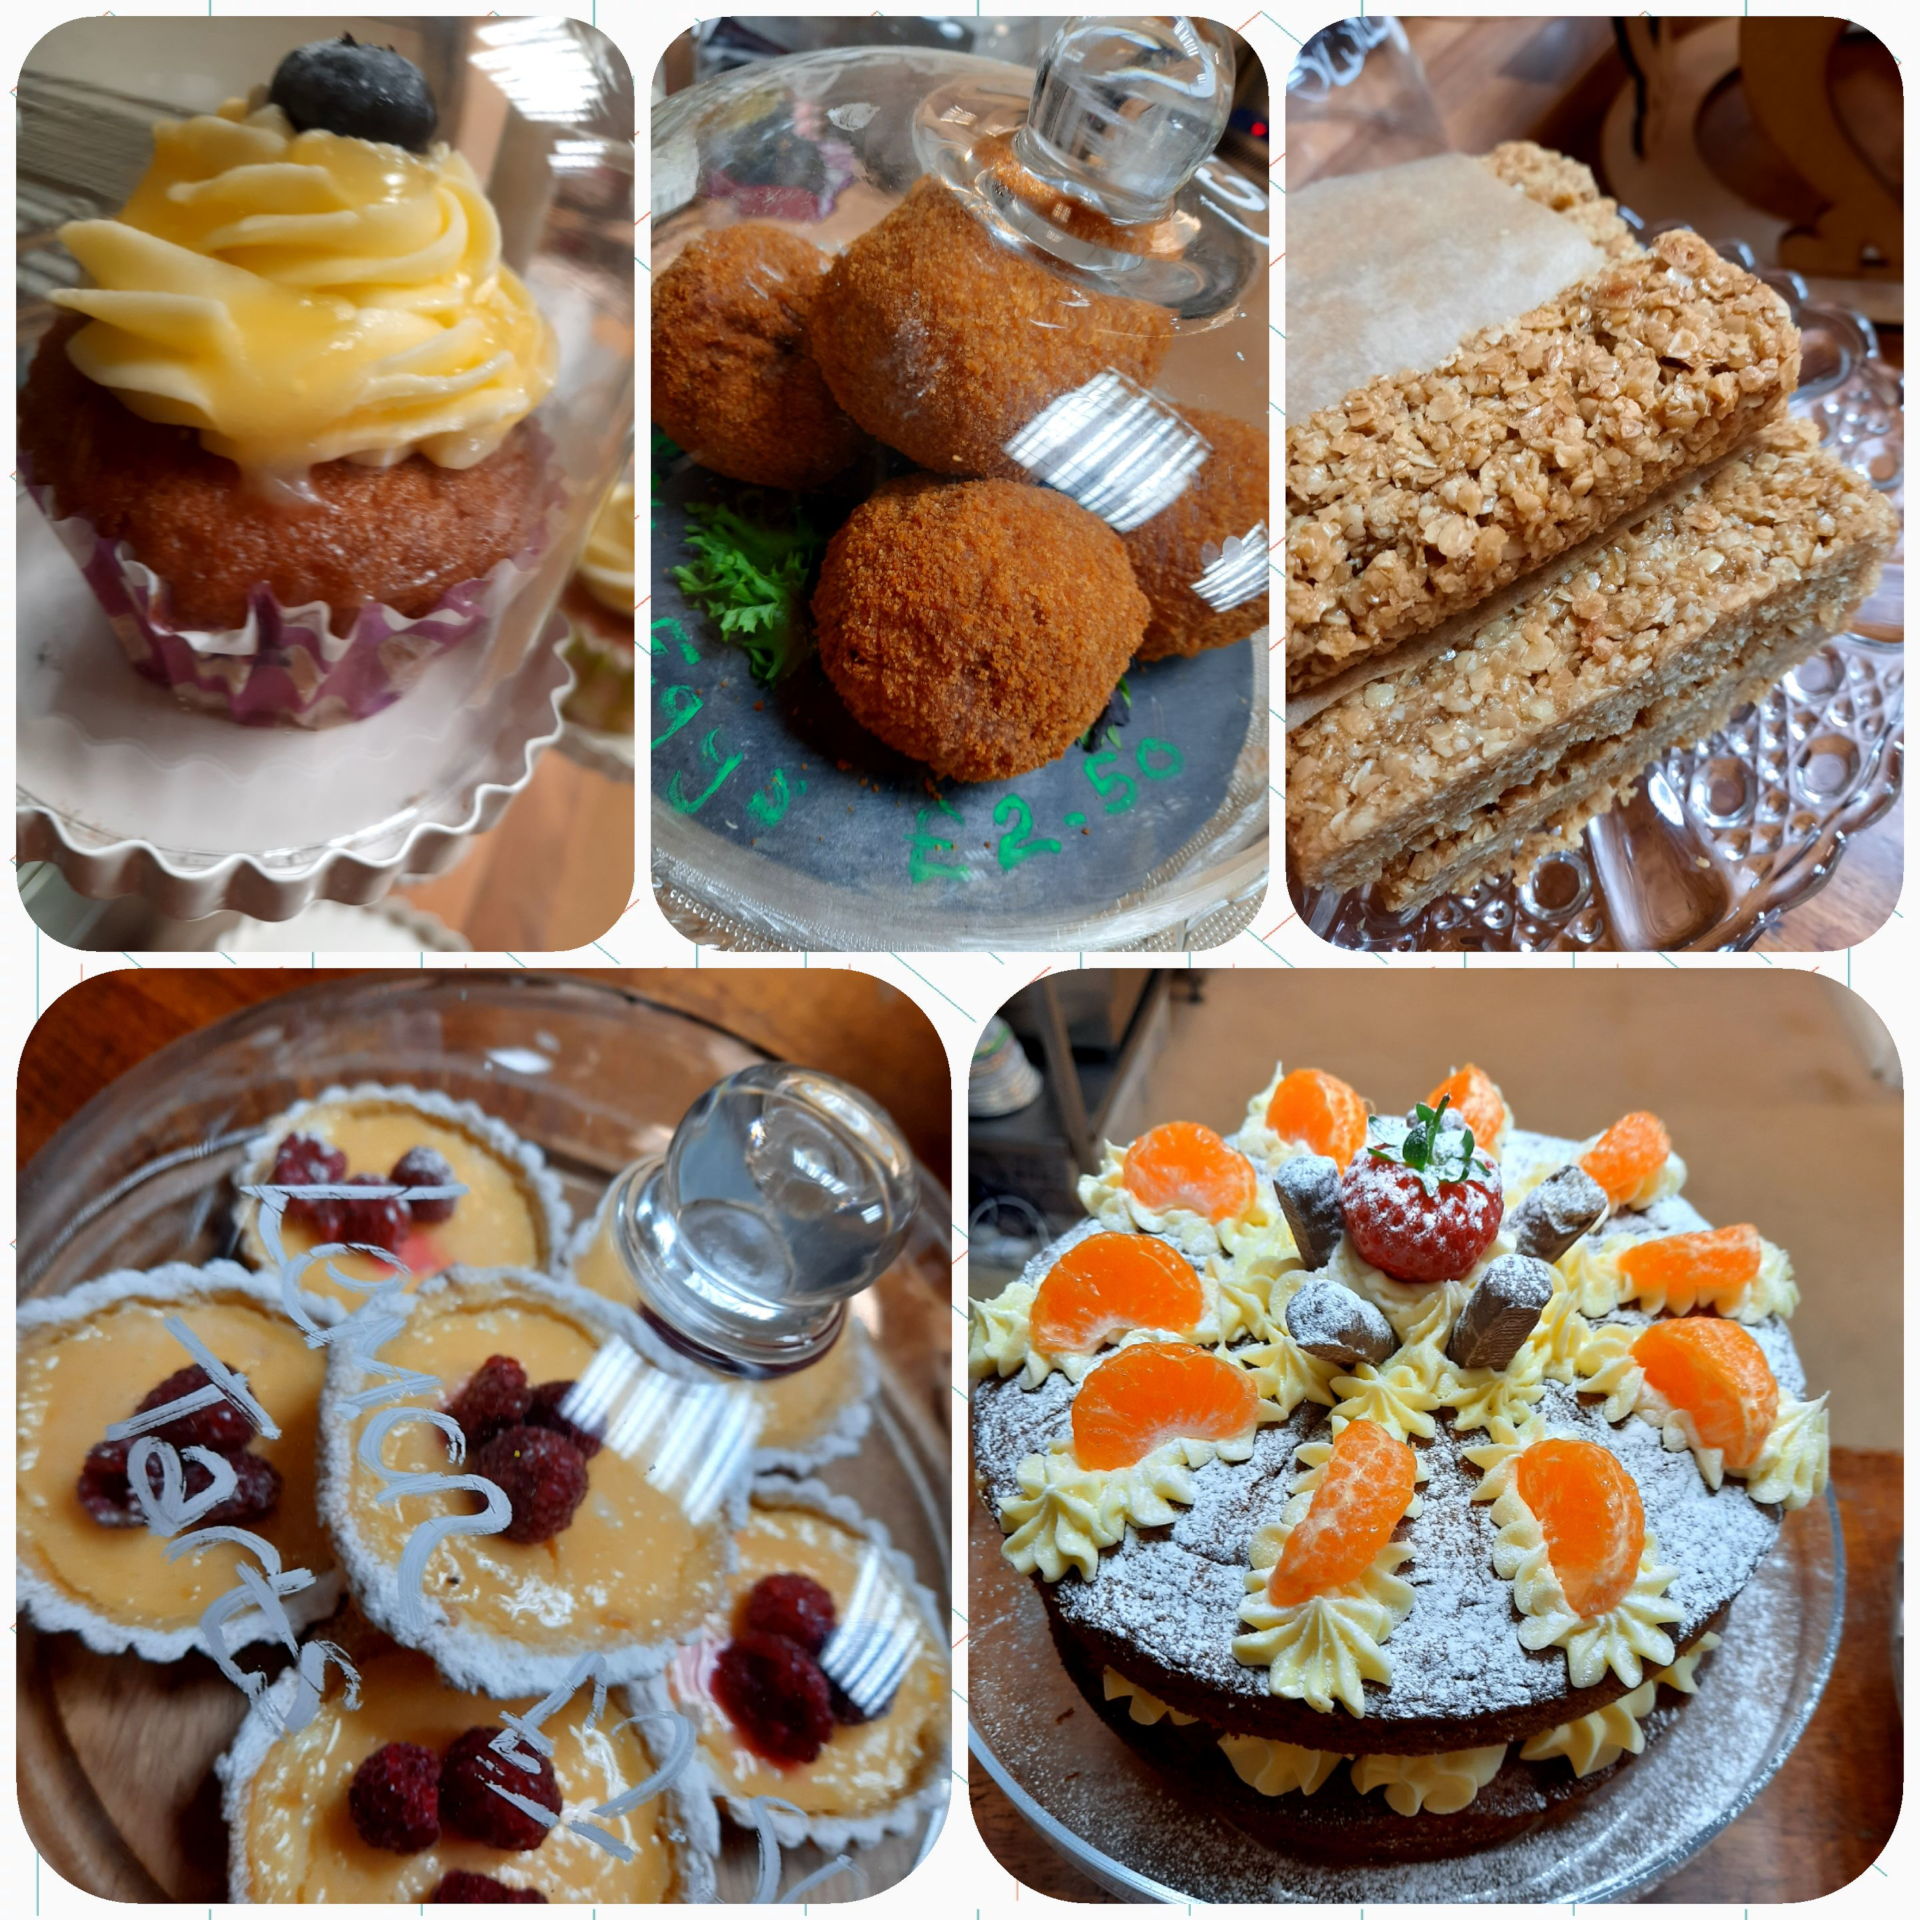 Selection of Cakes and Savory Snacks